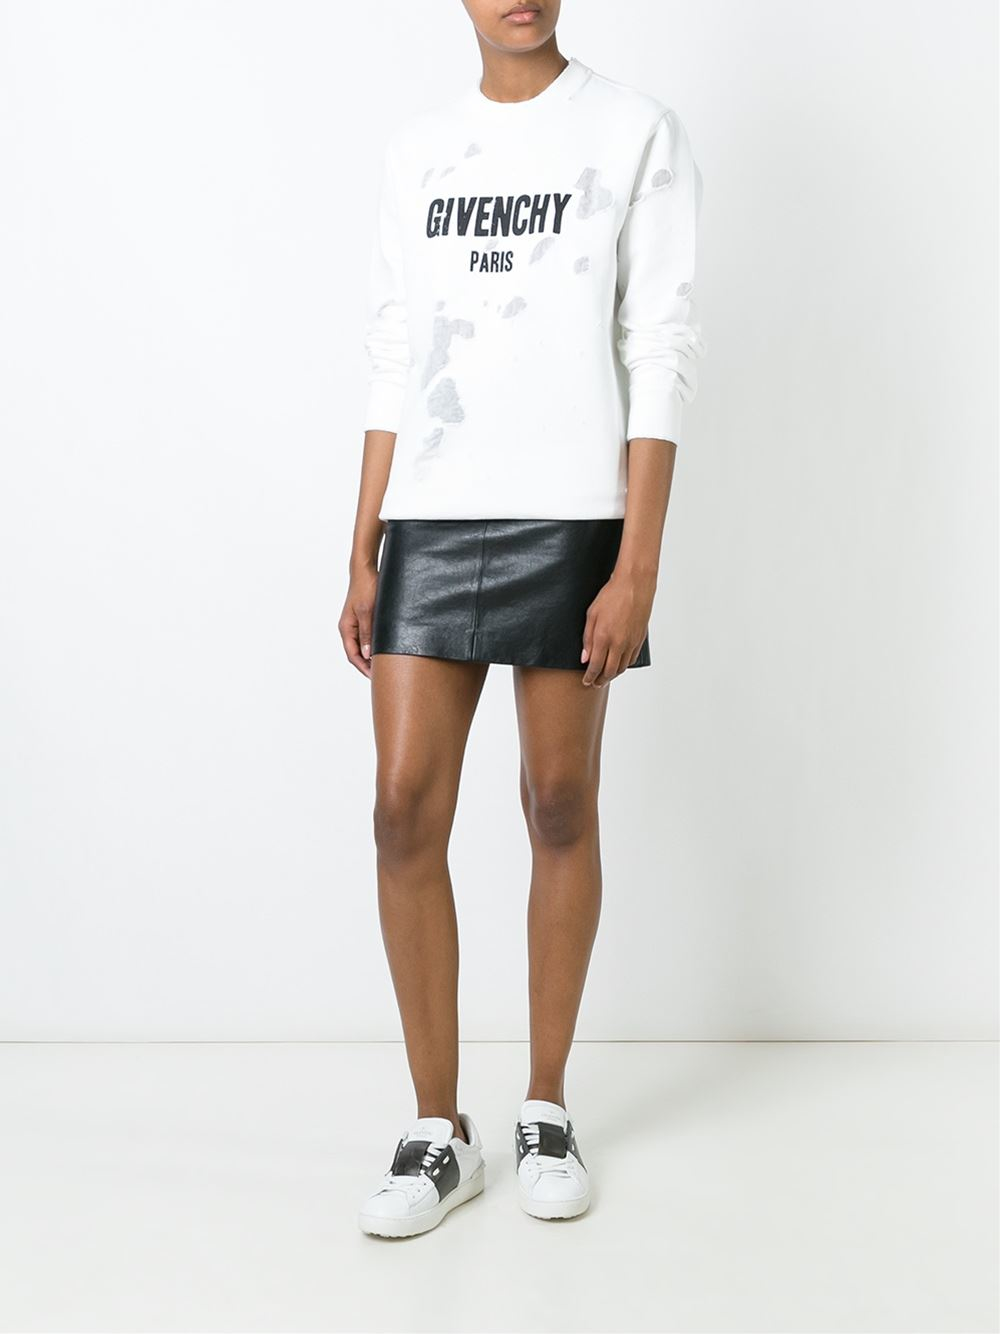 givenchy distressed sweater